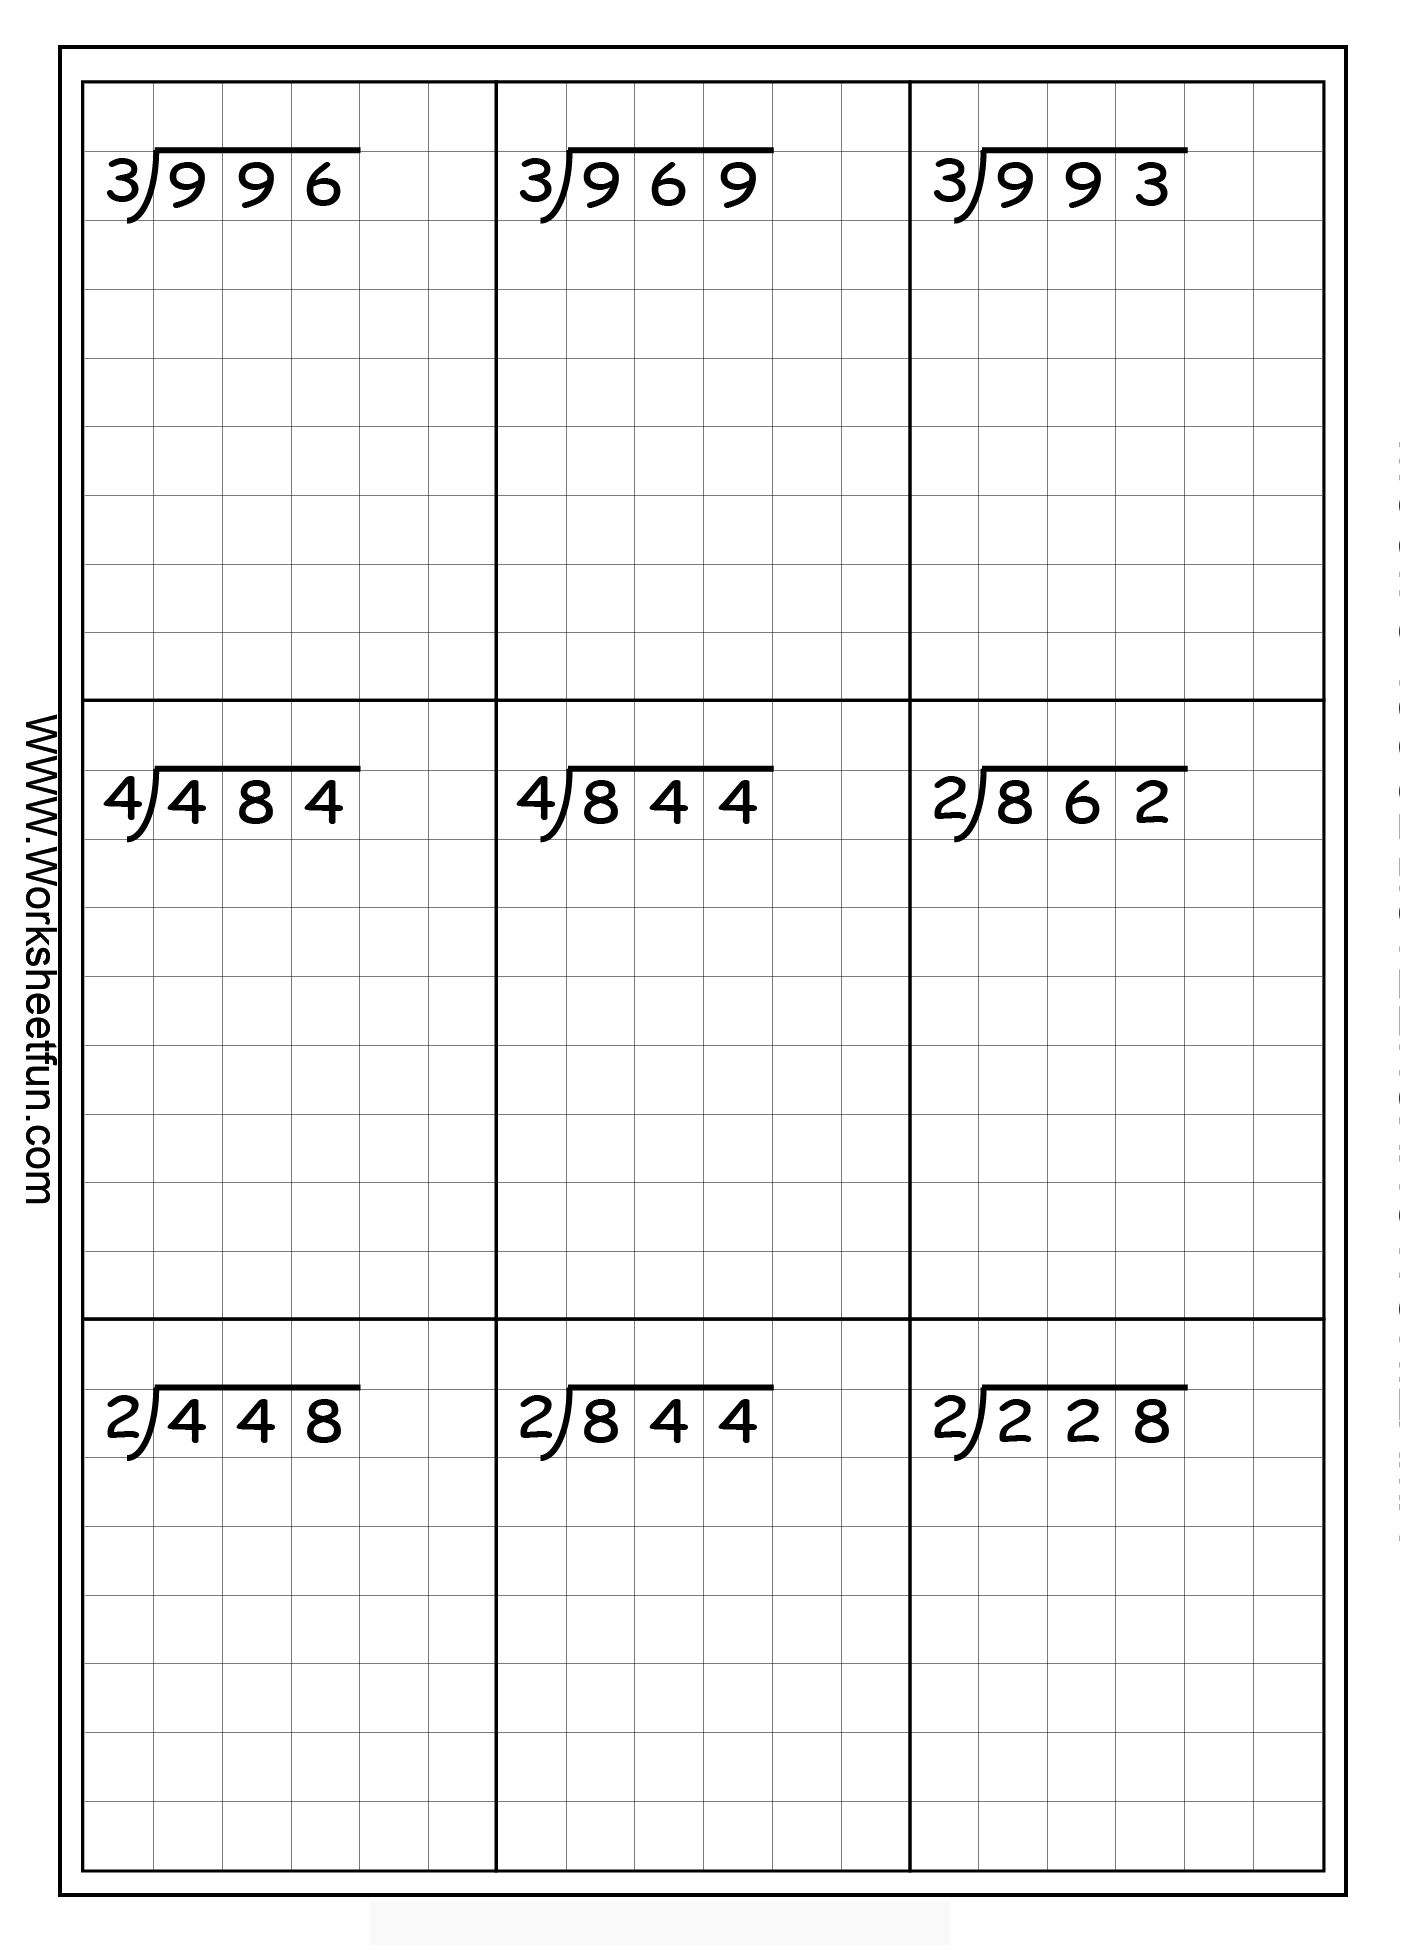 Long Division 3 Digits By 1 Digit Without Remainders 20 Worksheets FREE Printable 